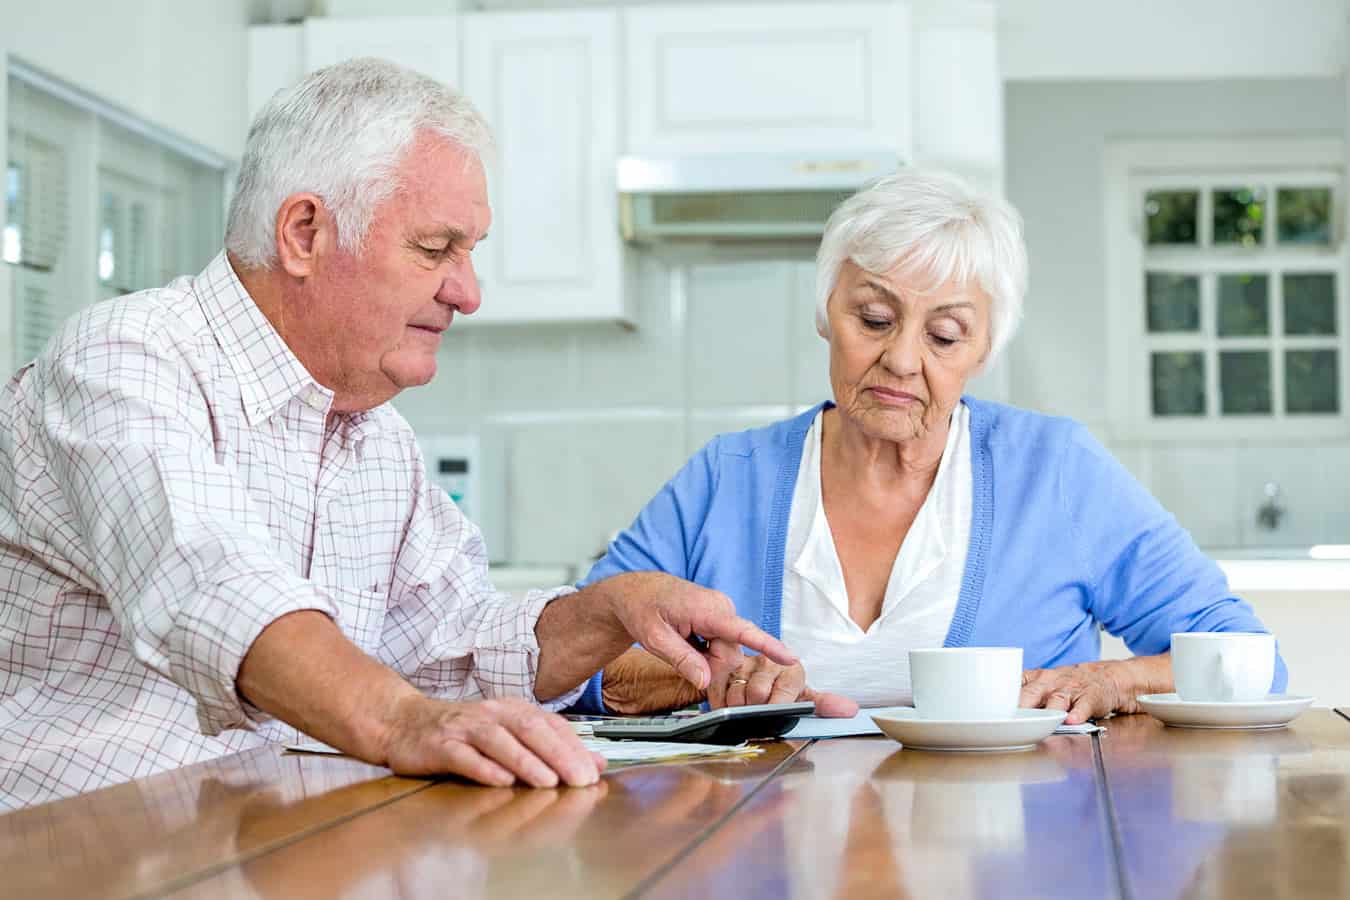 elderly-couple-at-kitchen-table-discussing-finances-regarding-timeshare-ownership-and-bankruptcy